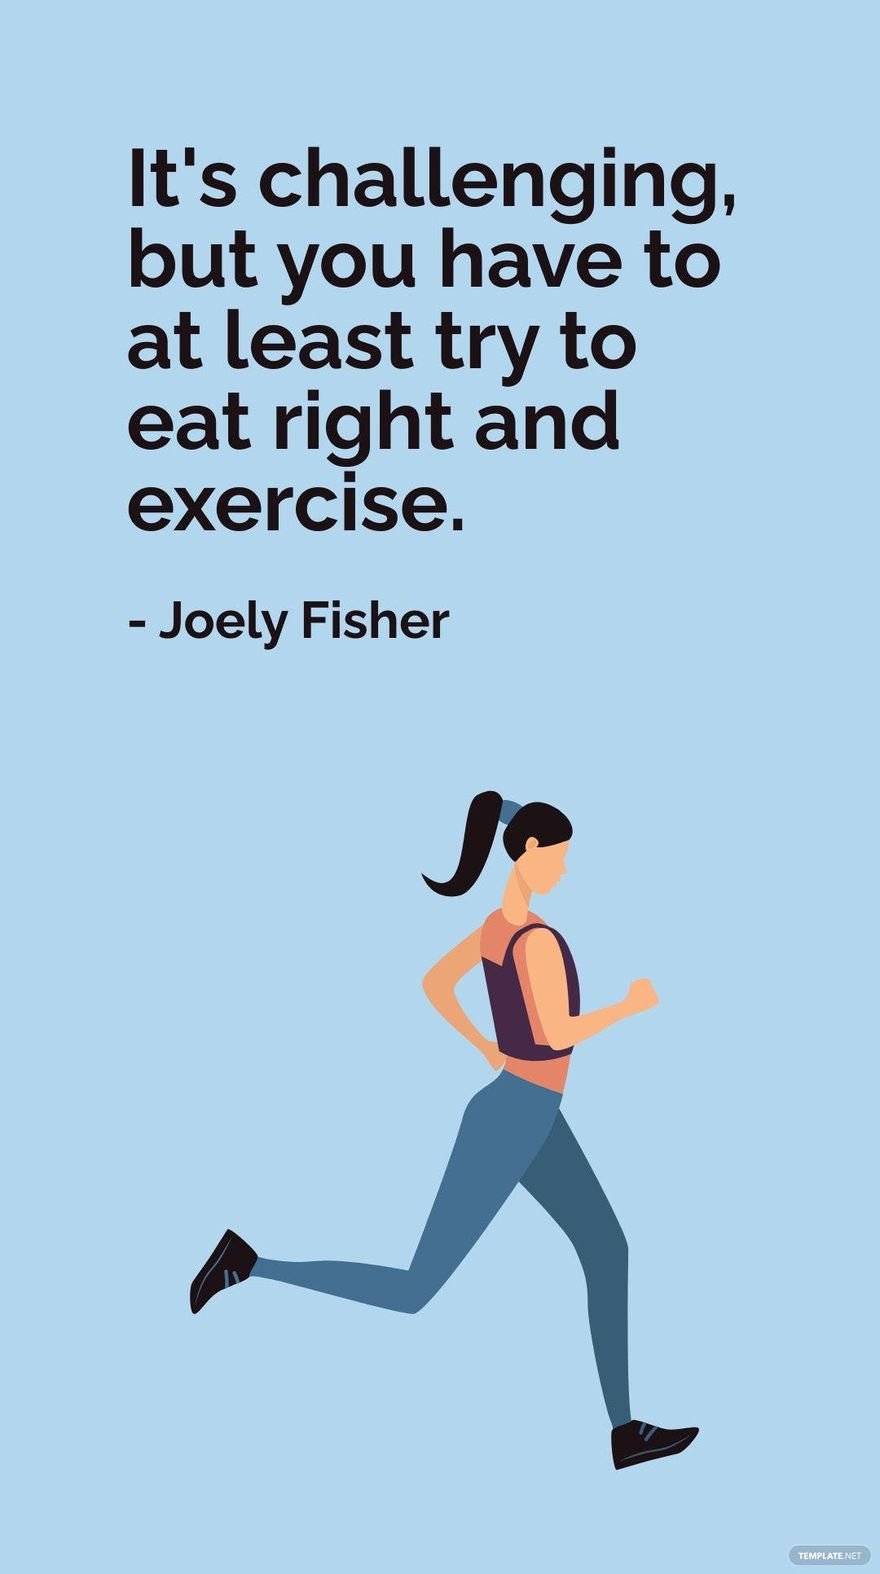 Joely Fisher - It's challenging, but you have to at least try to eat right and exercise. in JPG